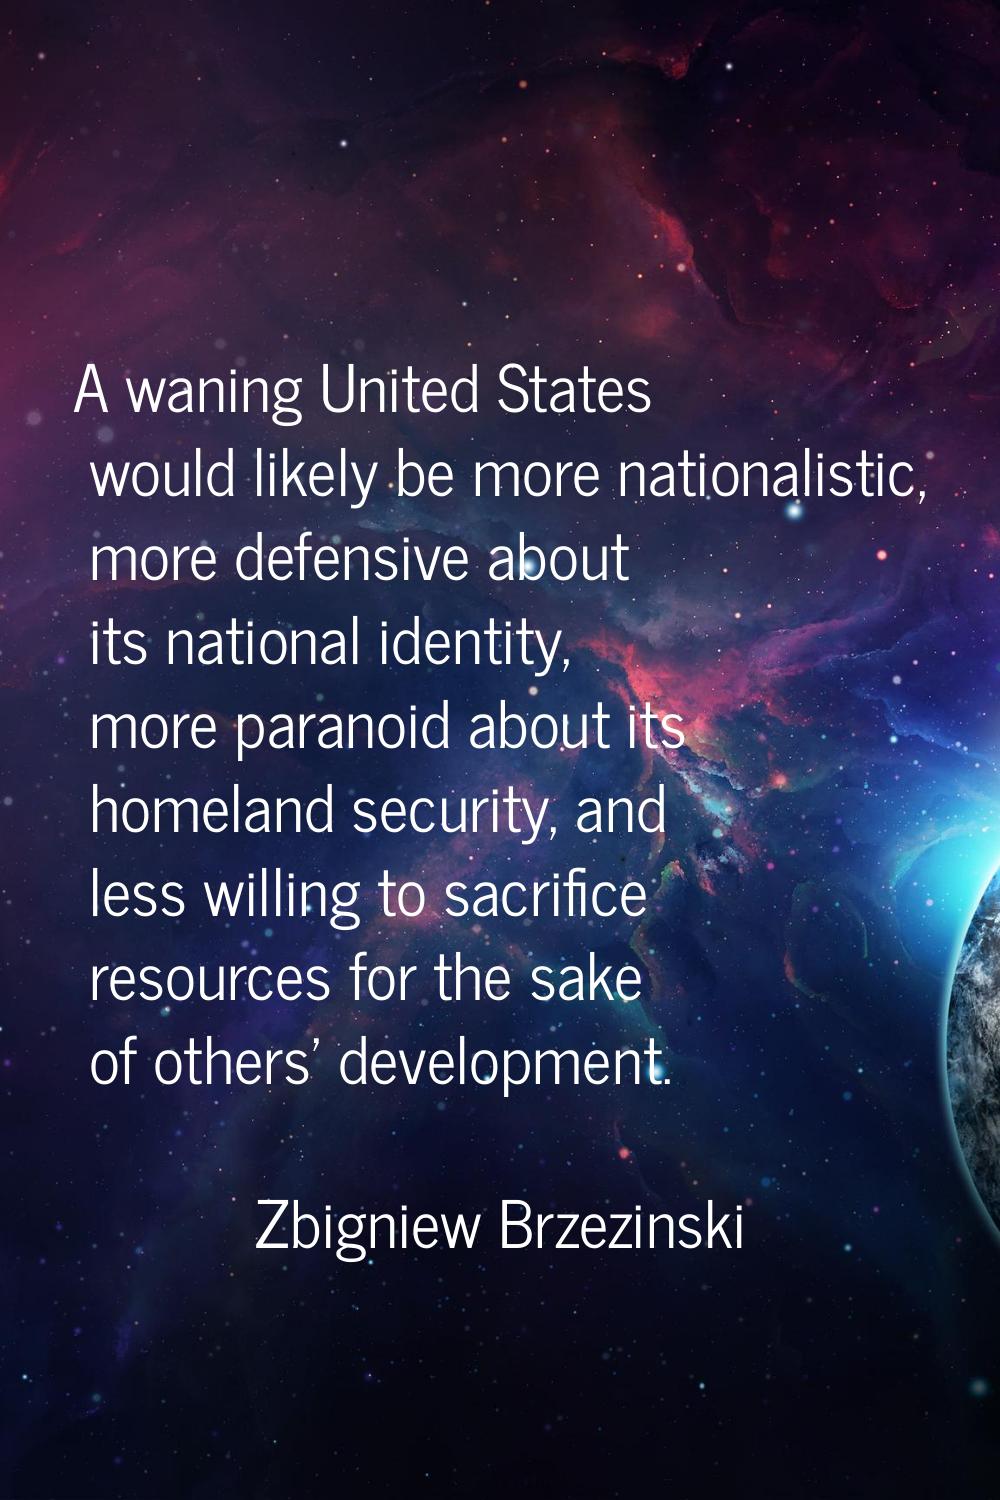 A waning United States would likely be more nationalistic, more defensive about its national identi